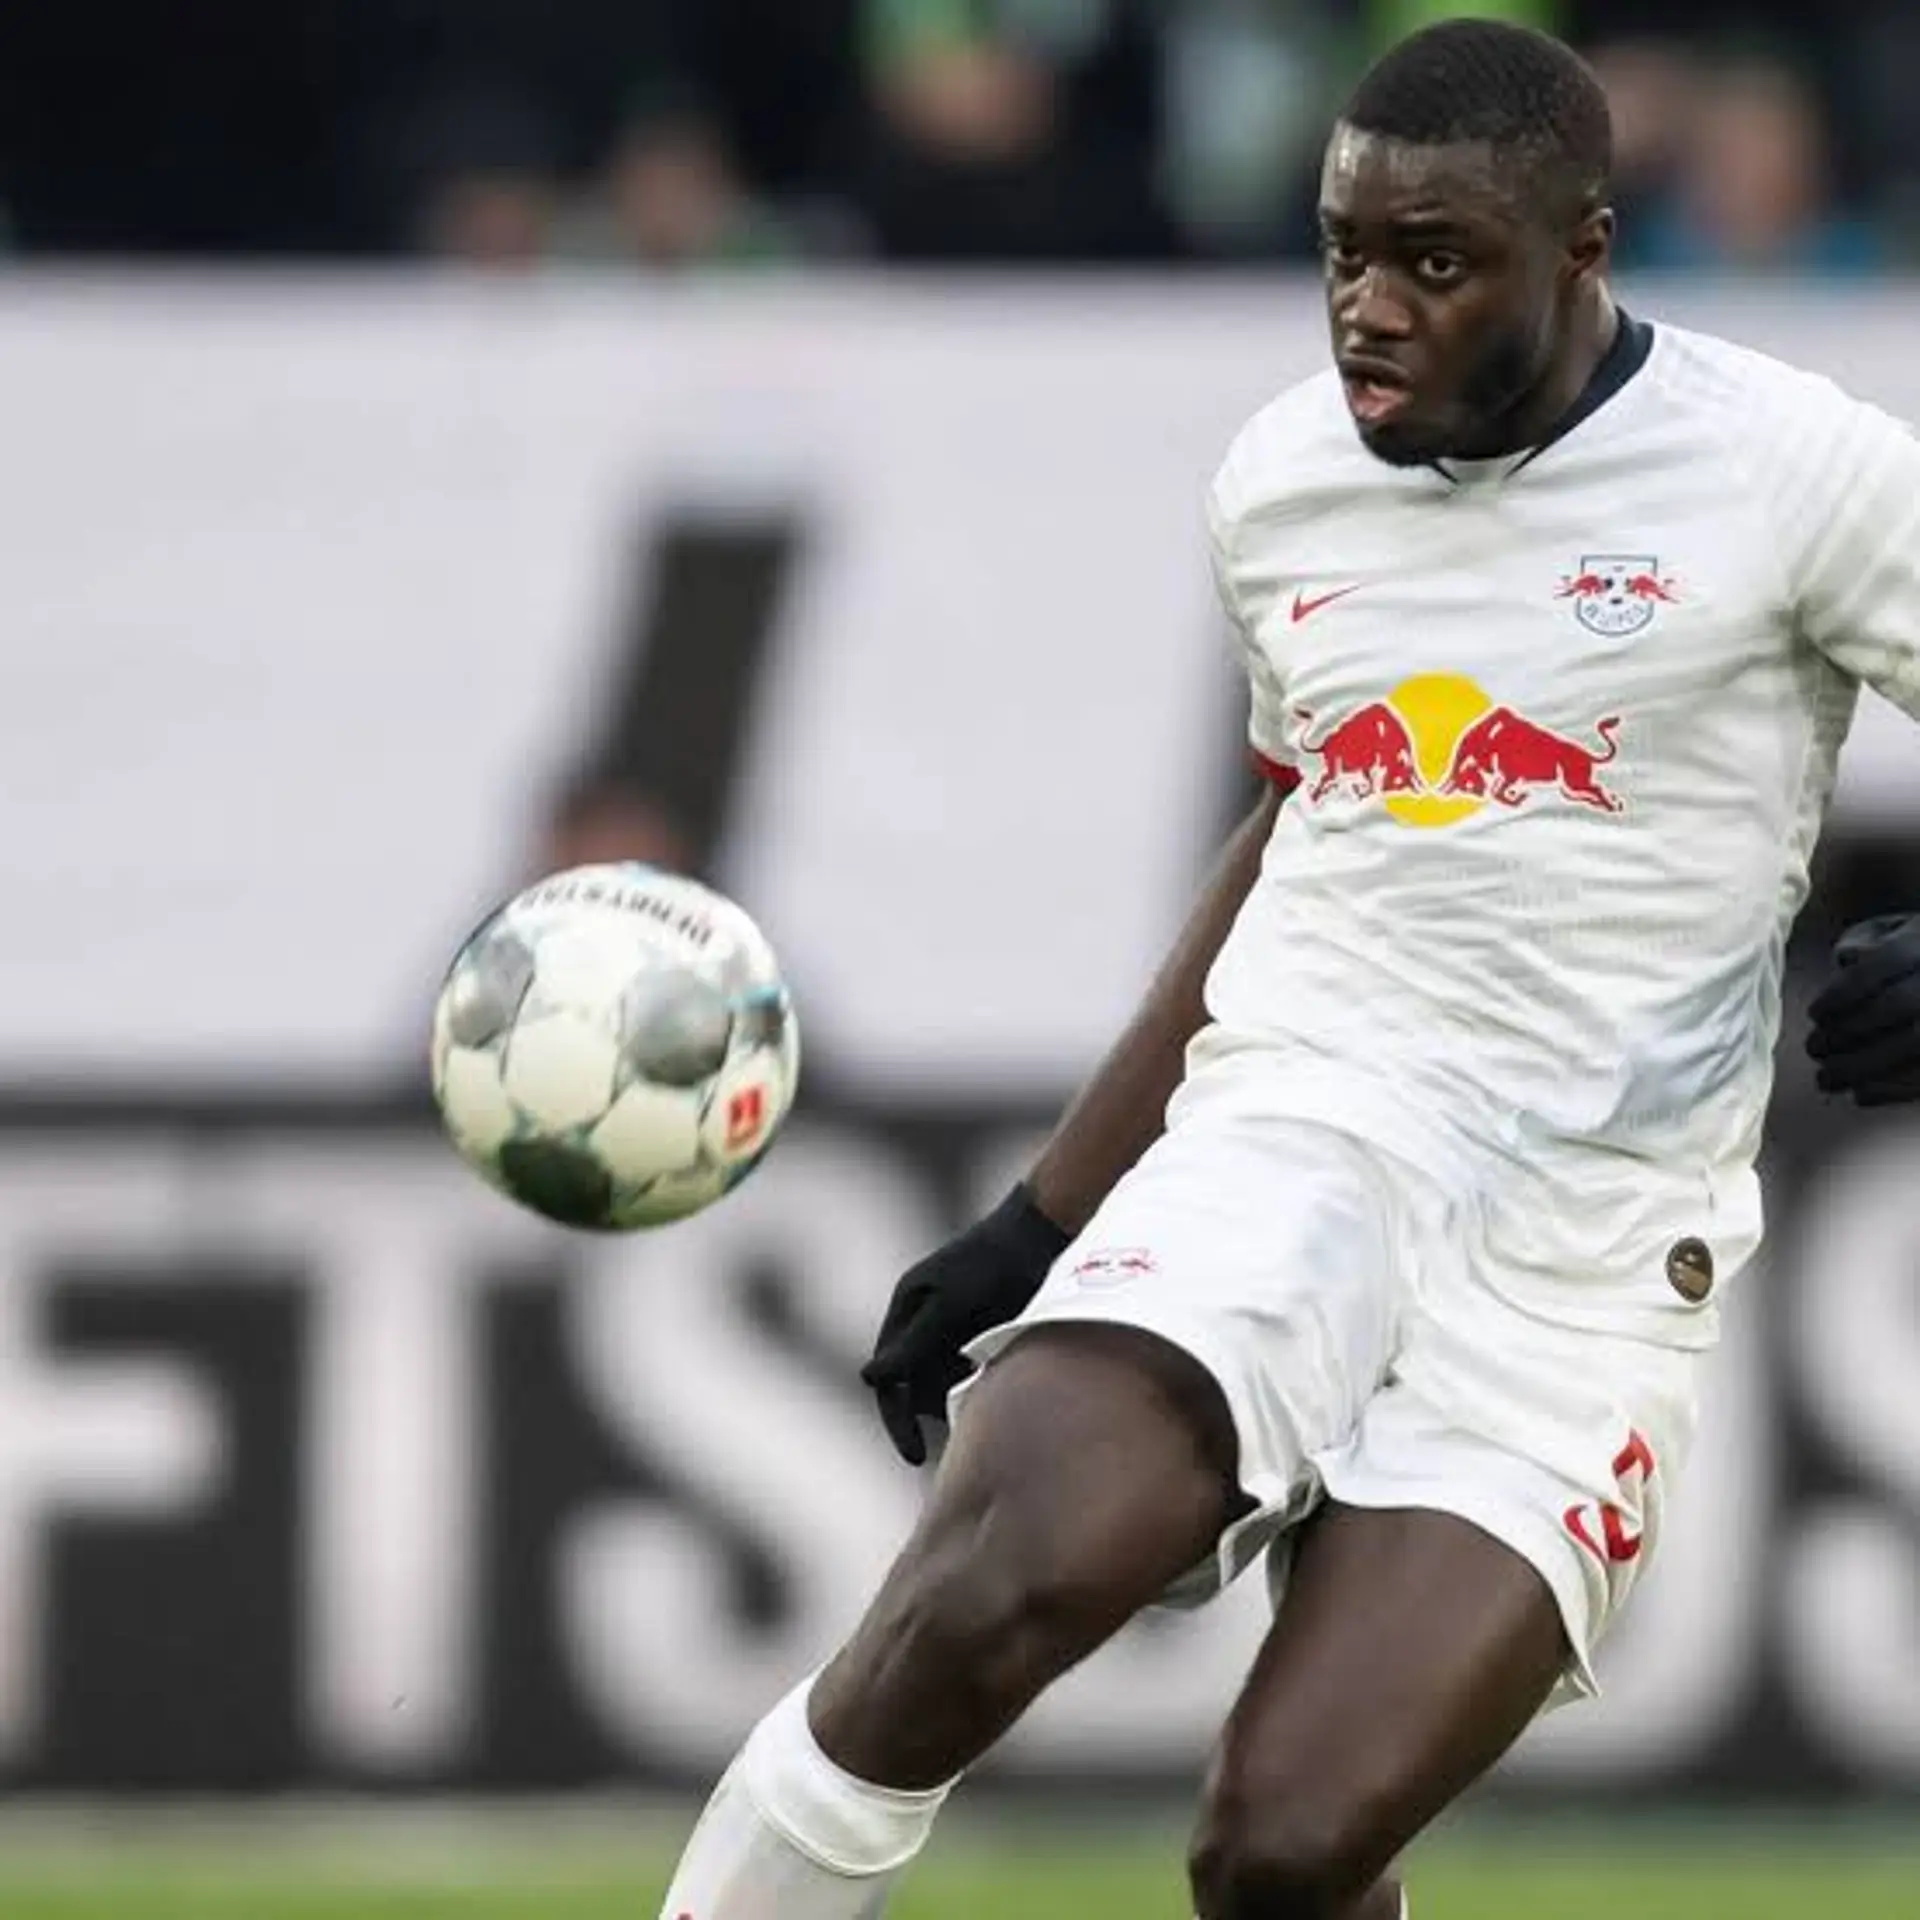 Zinedine Zidane is absolutely right asking for Dayot Upamecano in 2021